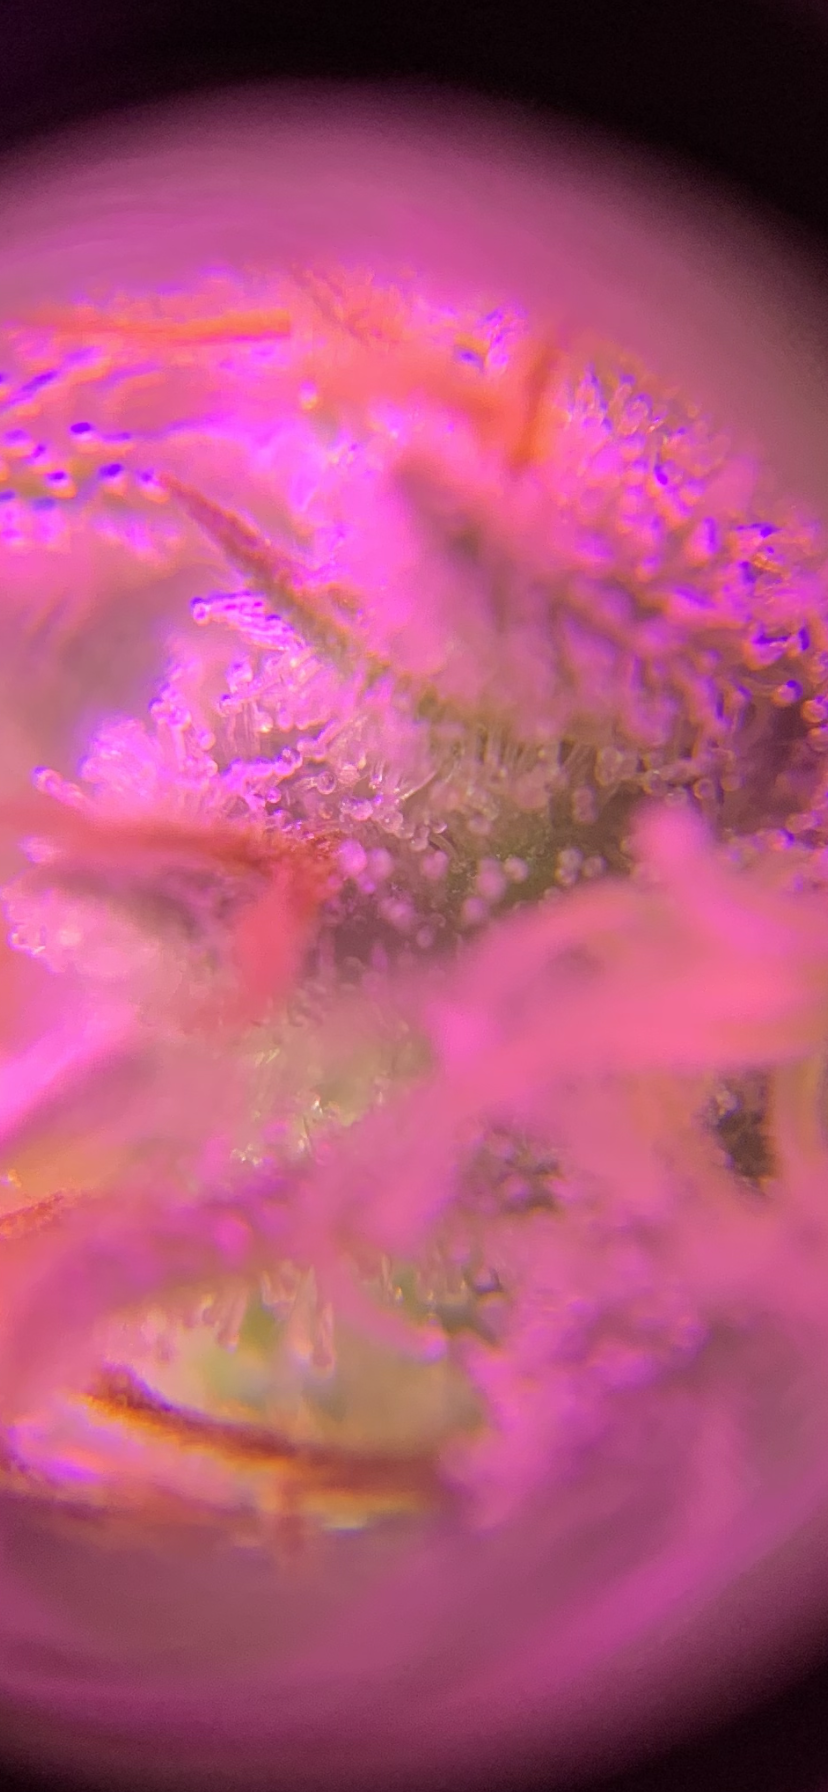 Trichomes look like they are turning a bit 5